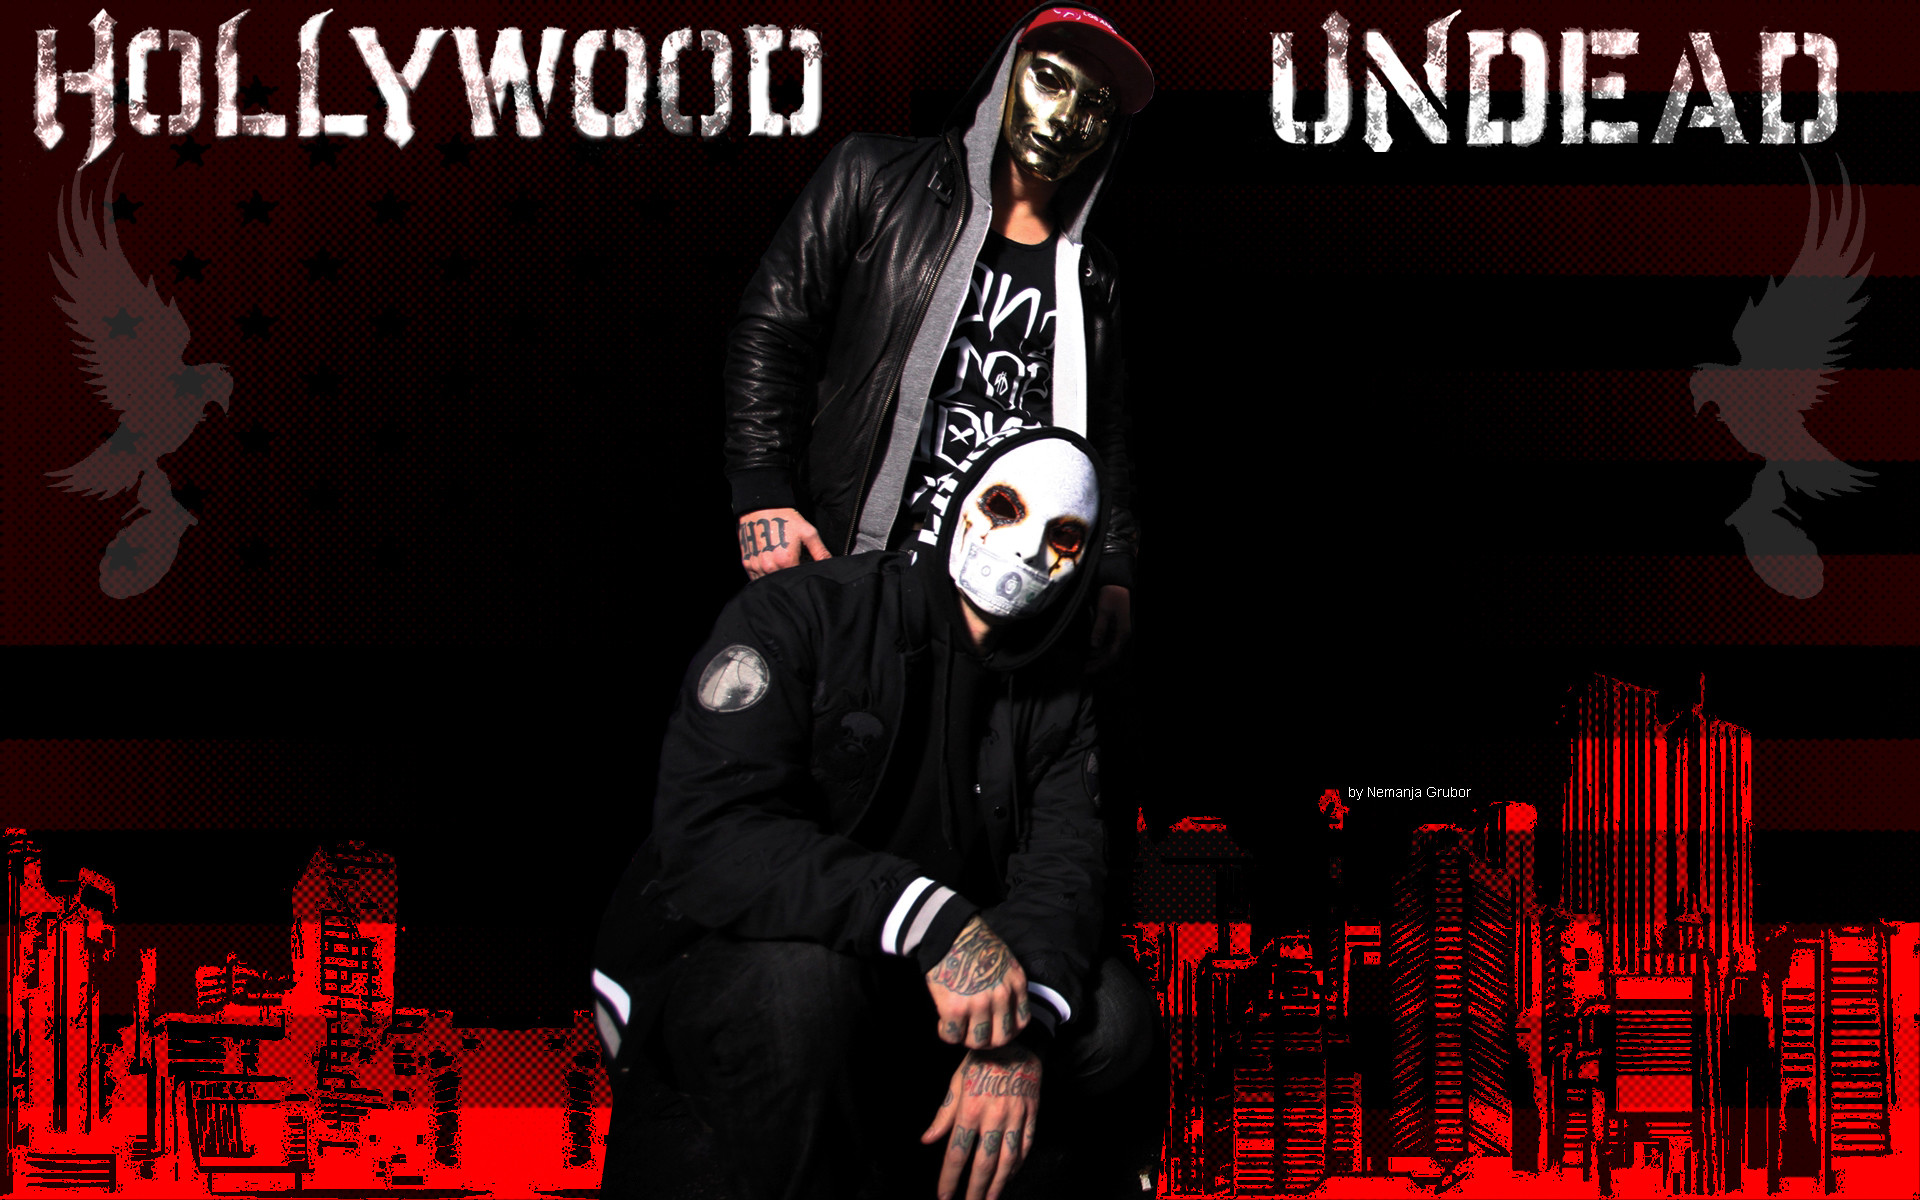 1920x1200 hollywood undead danny wallpaper displaying 16 images for hollywood  